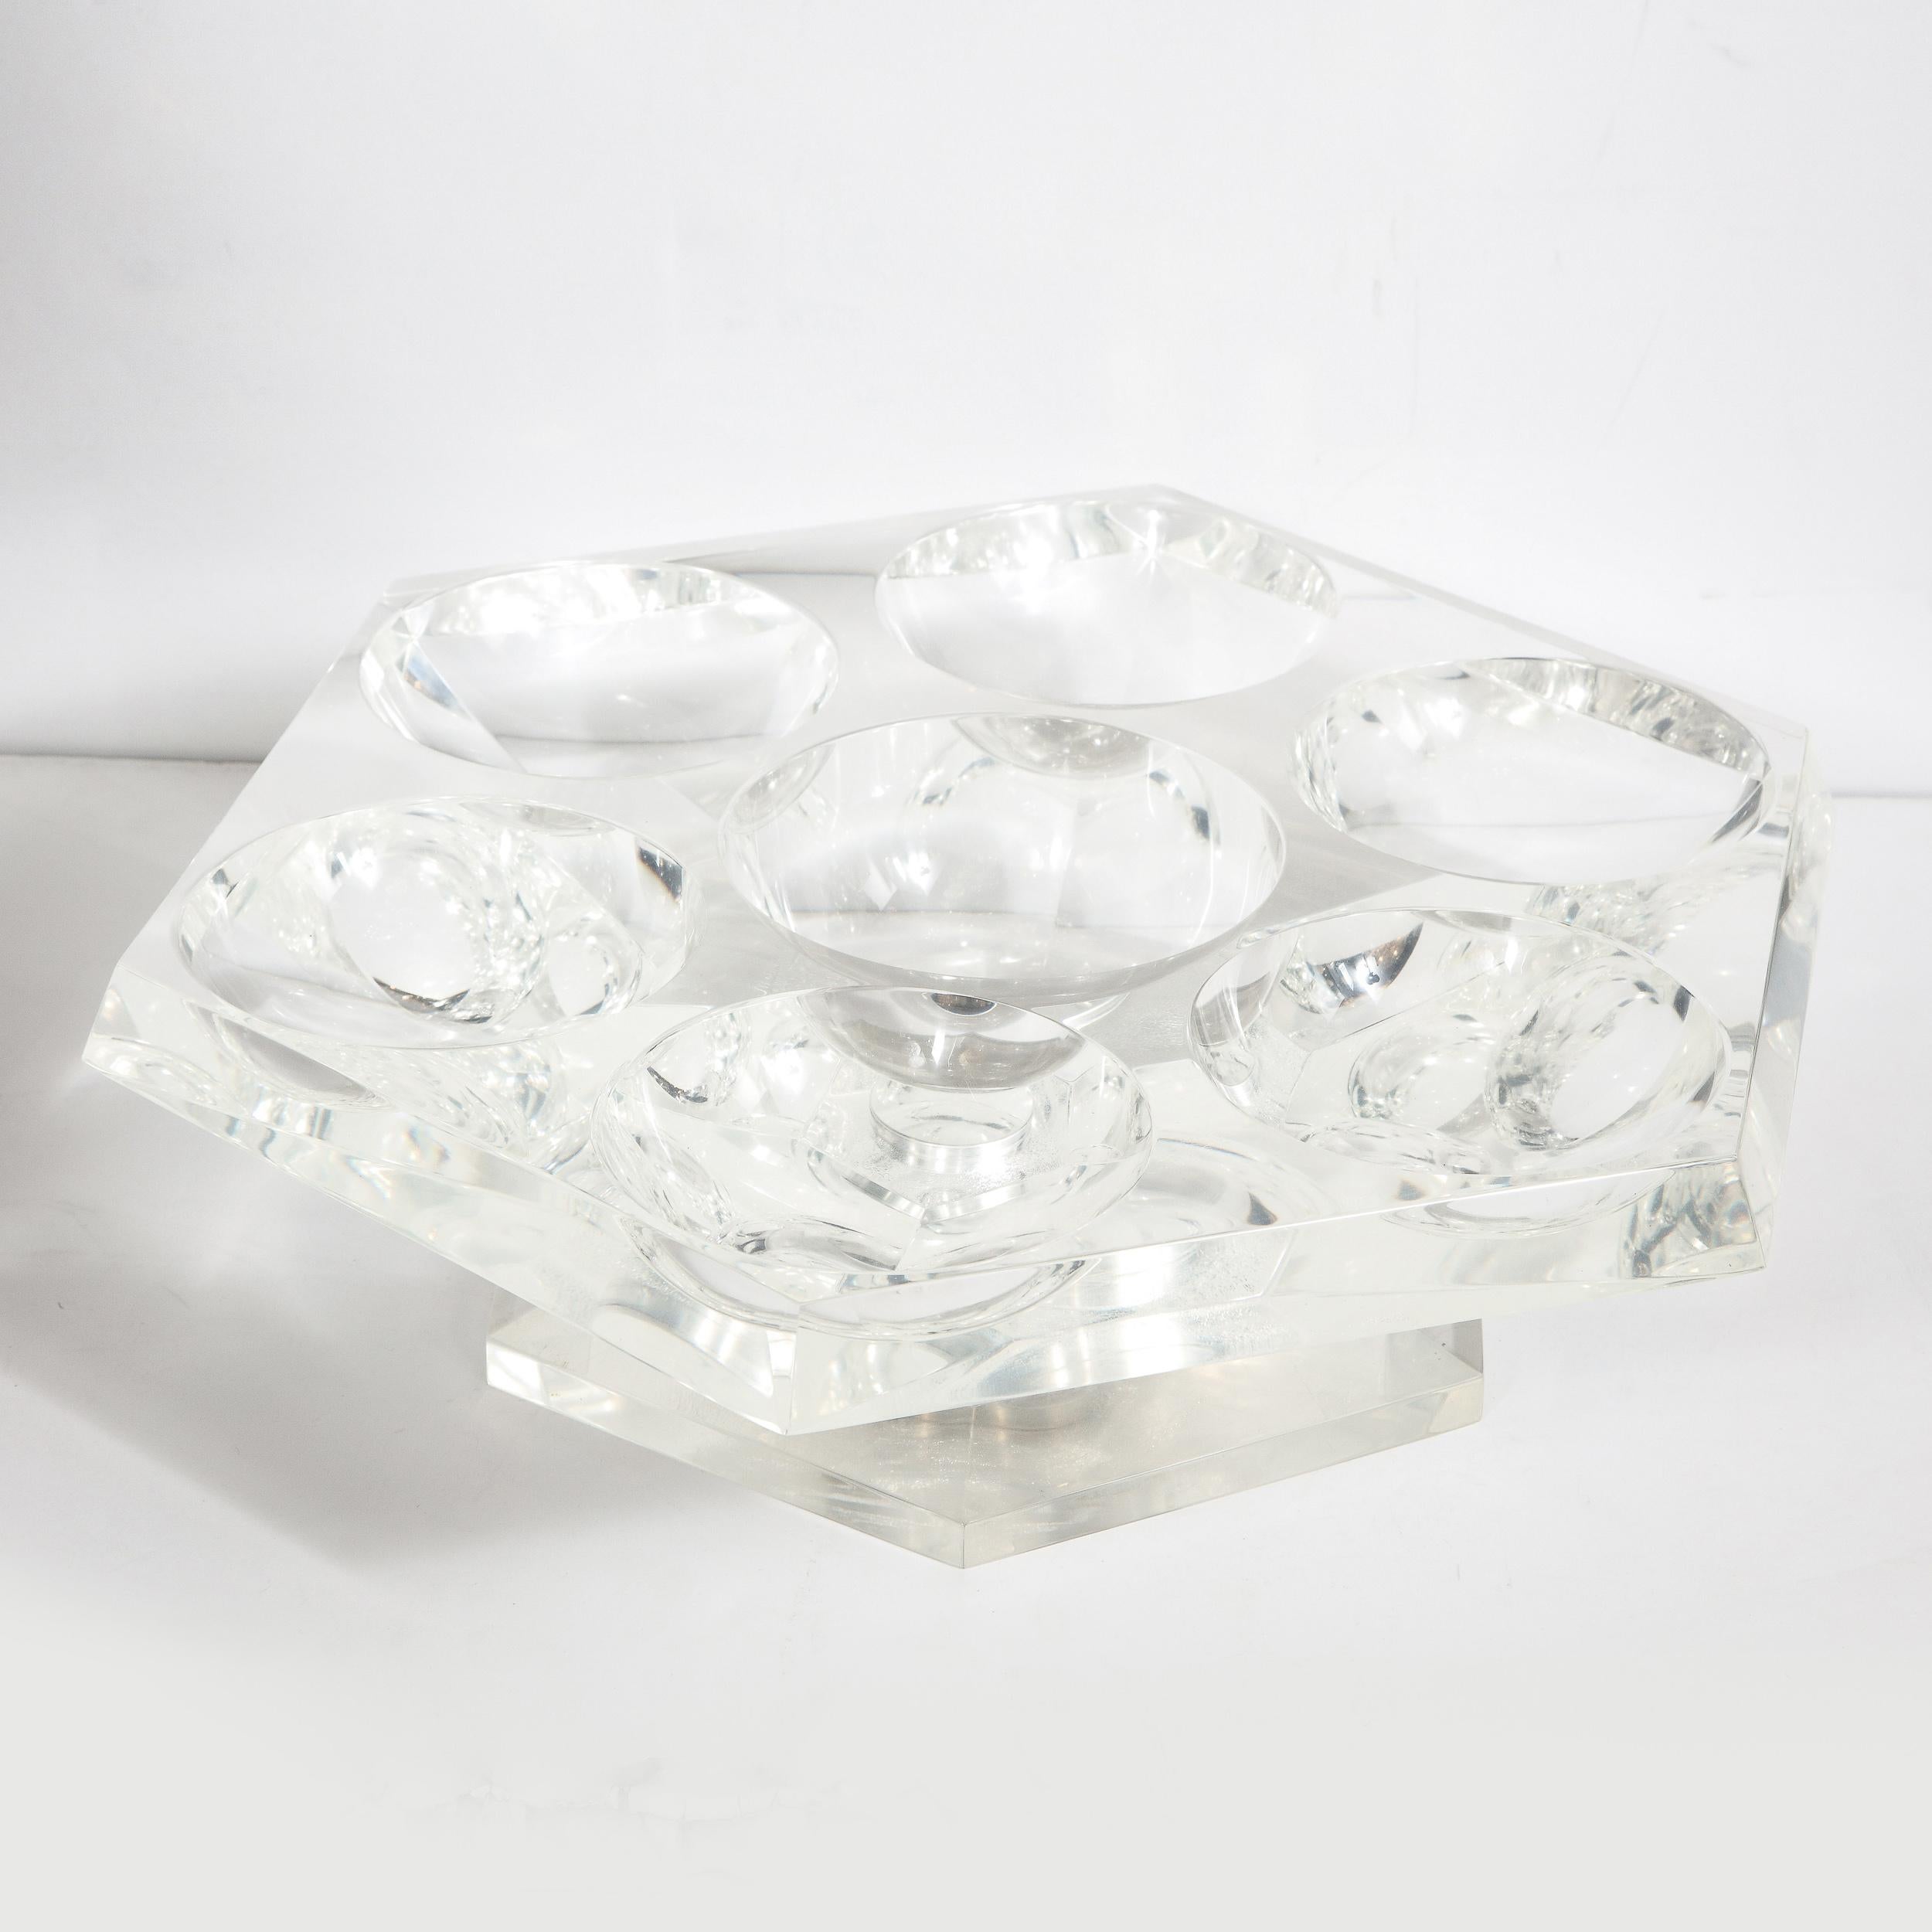 American Midcentury Hexagonal Lucite Rotating Tray with Concave Serving Indentations